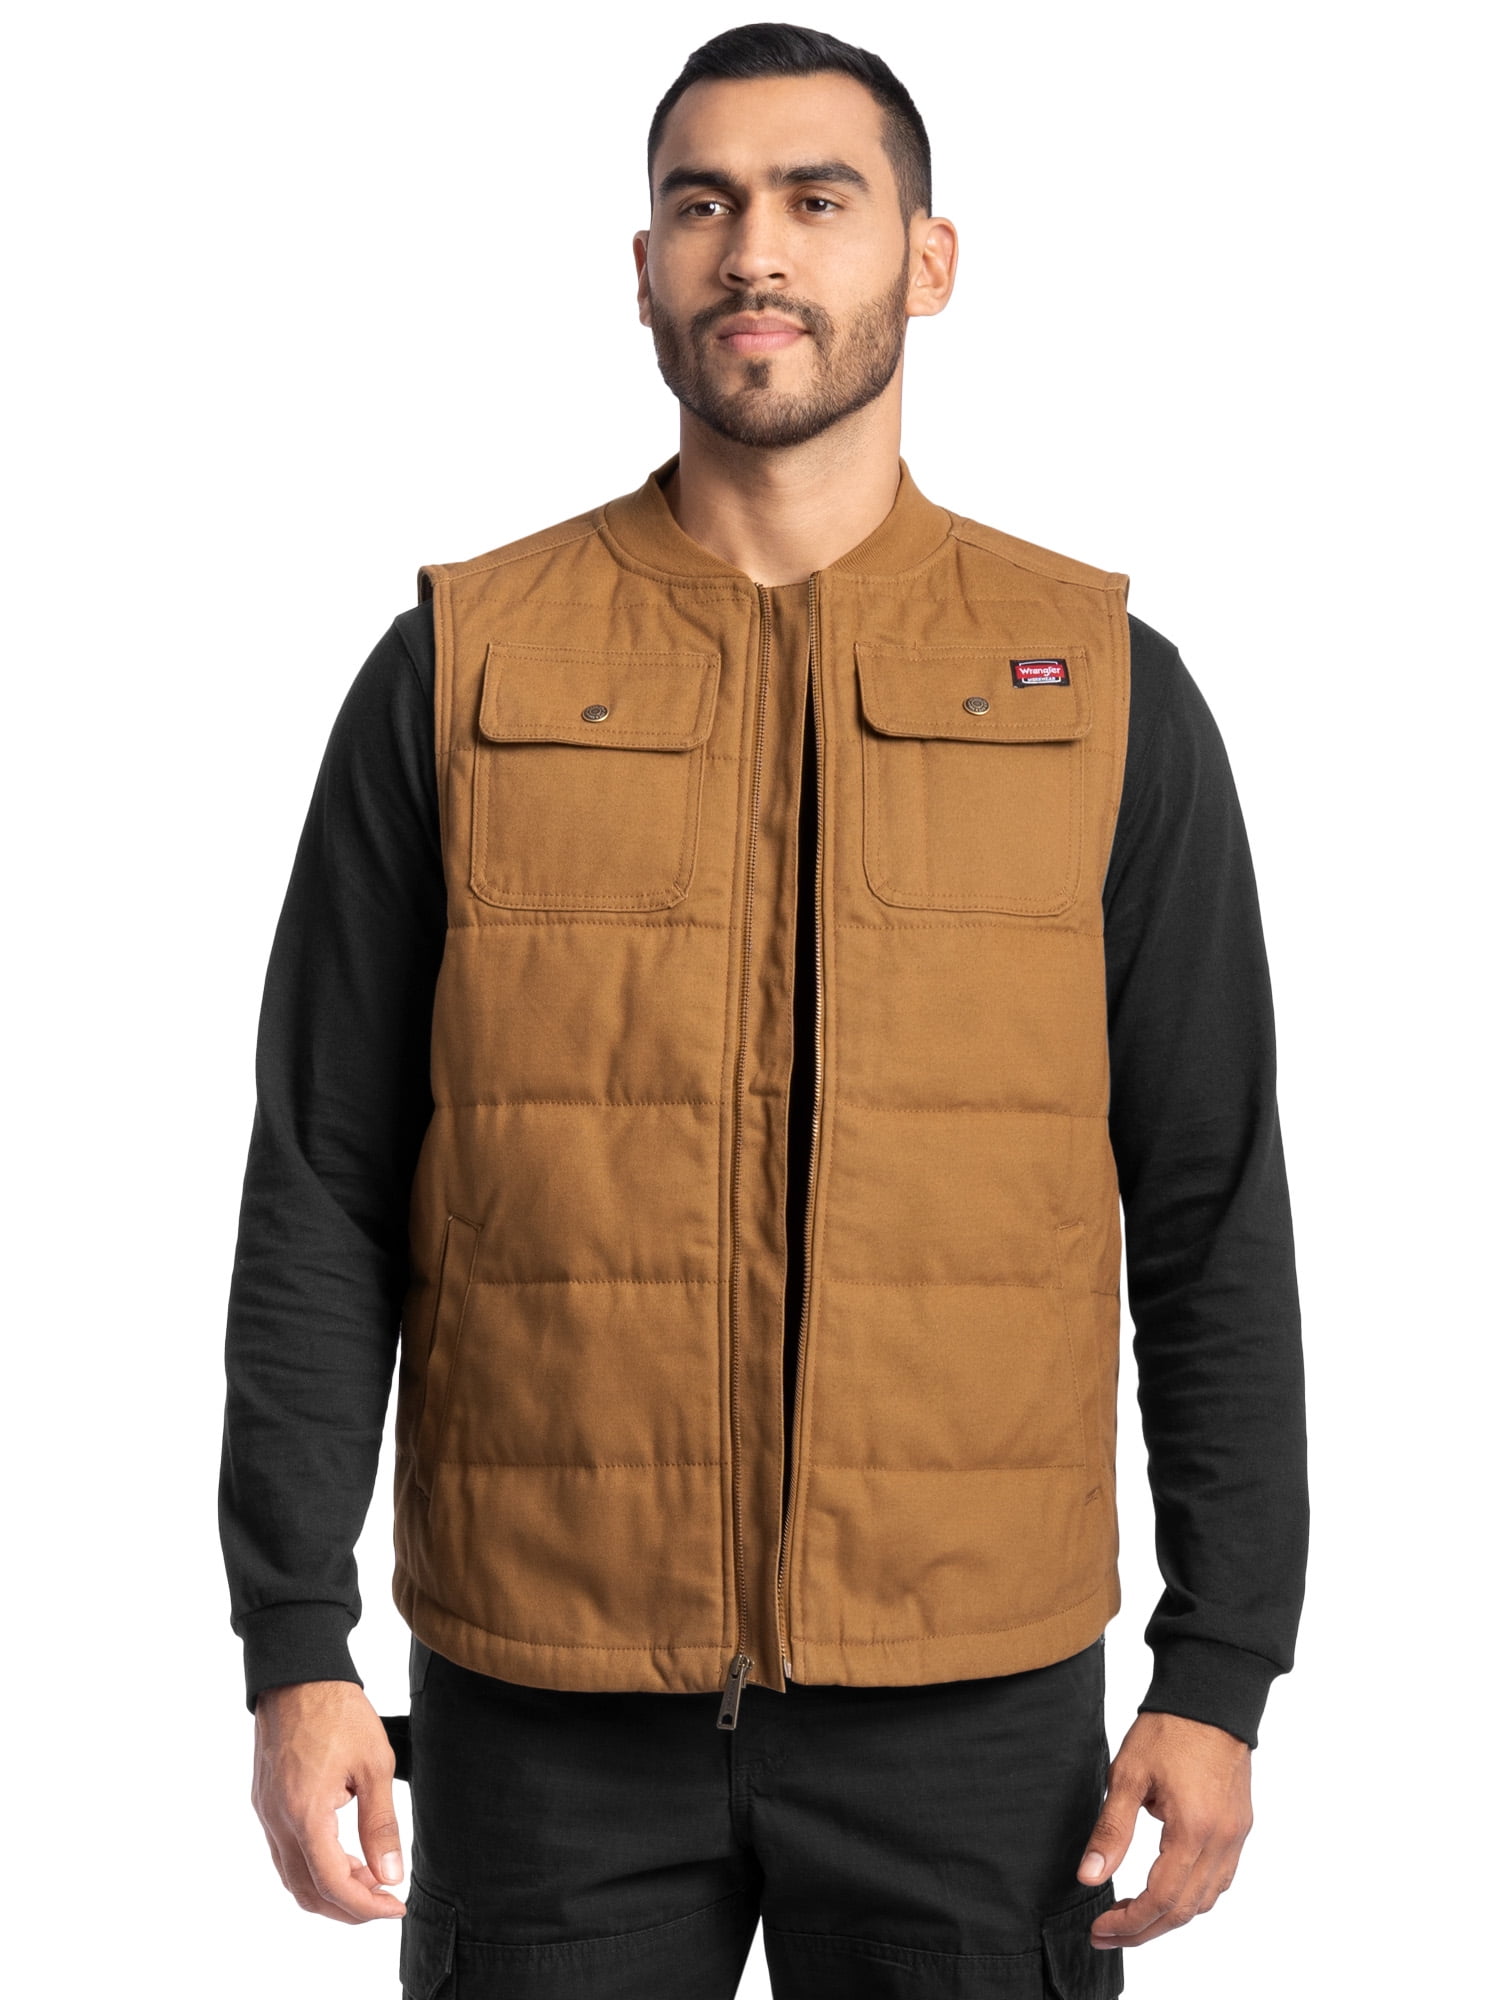 Wrangler Workwear Men's Quilted Duck Work Vest, Size Small to 3XL (Men's  and Big Men's) 